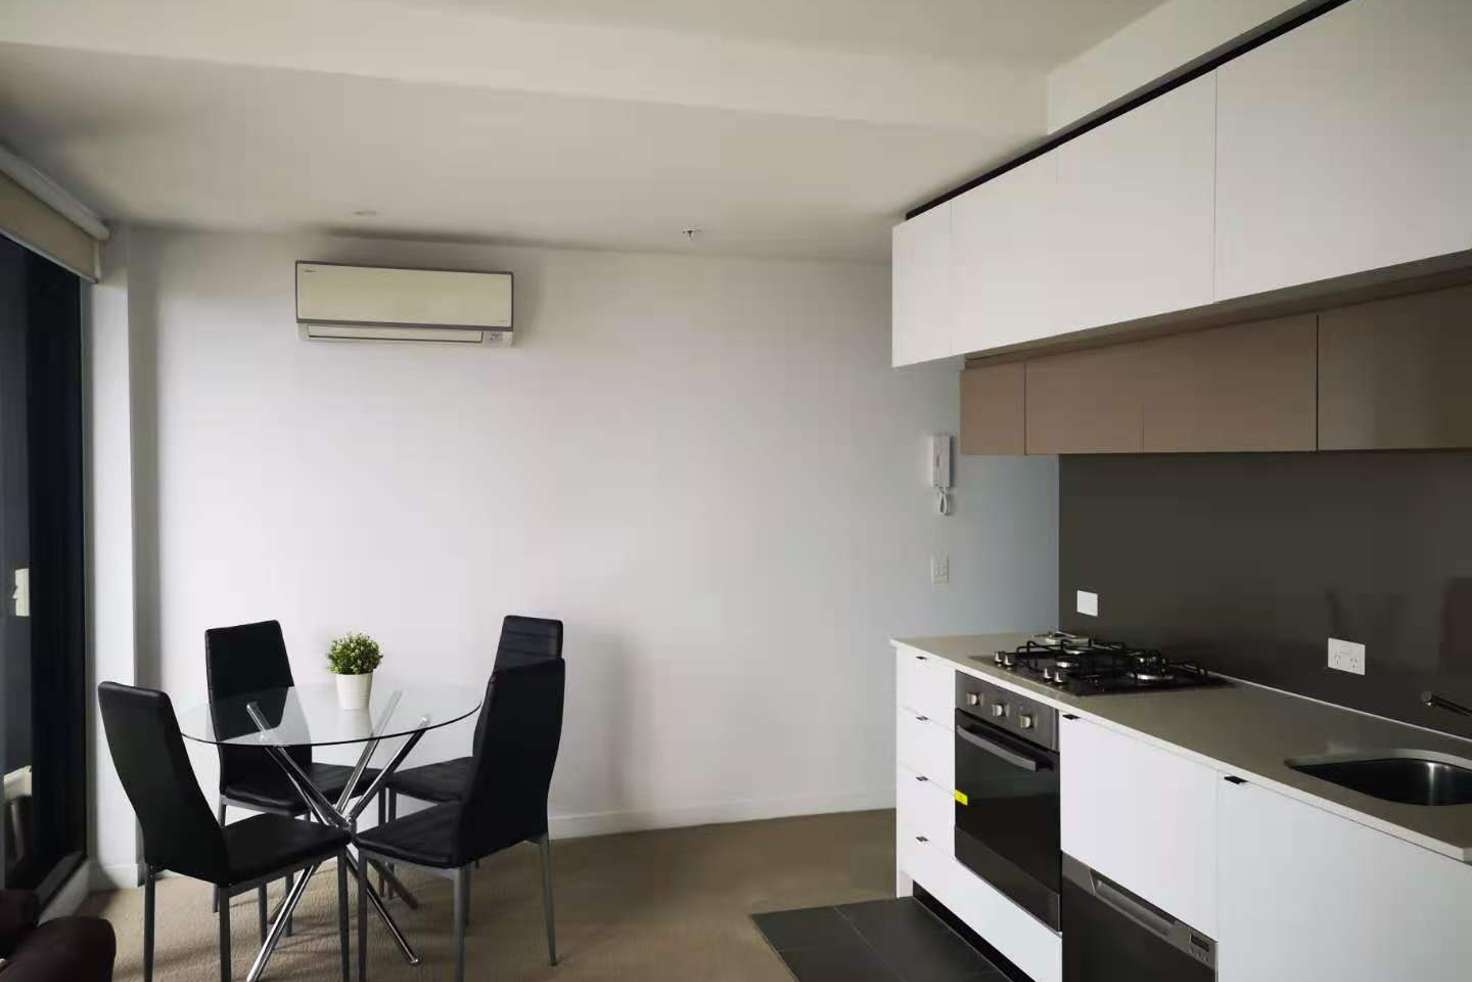 Main view of Homely apartment listing, 3212/80 A'BECKETT STREET, Melbourne VIC 3000